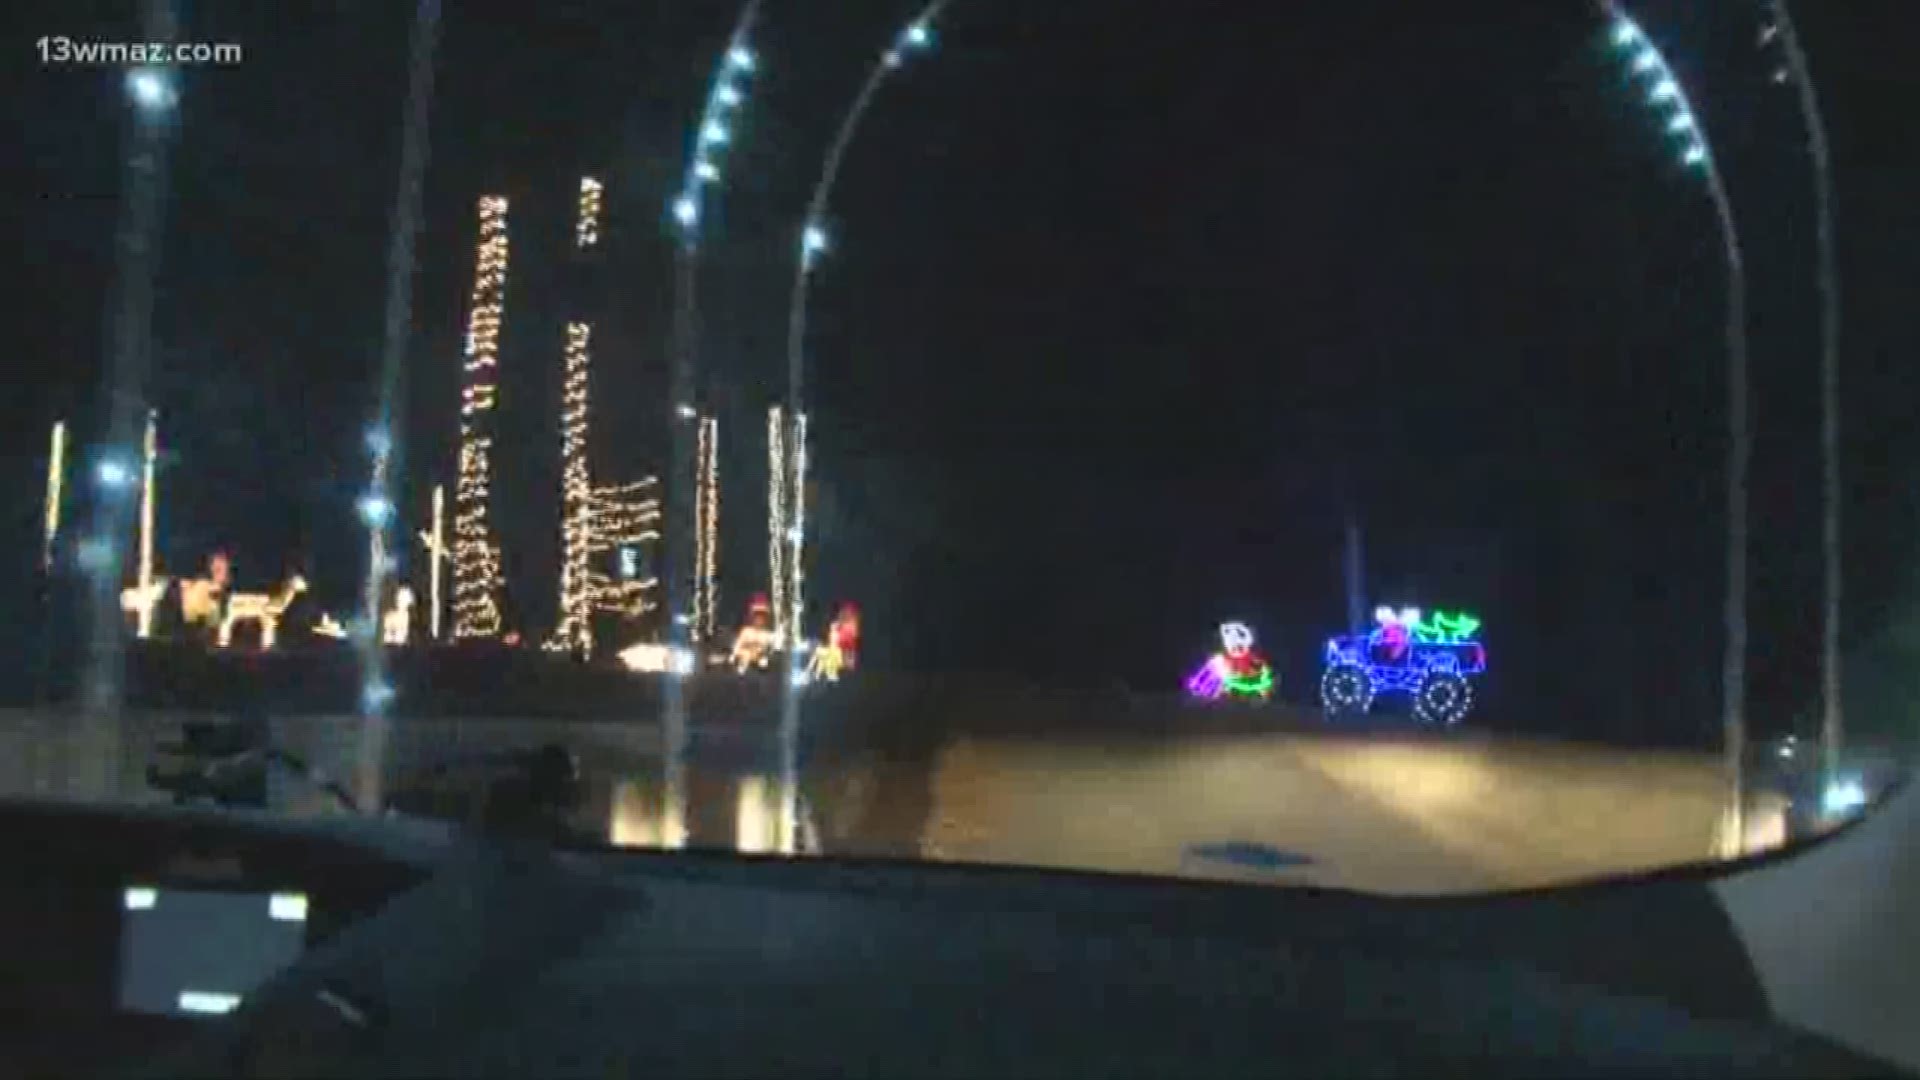 Looking for Central Georgia's best light displays